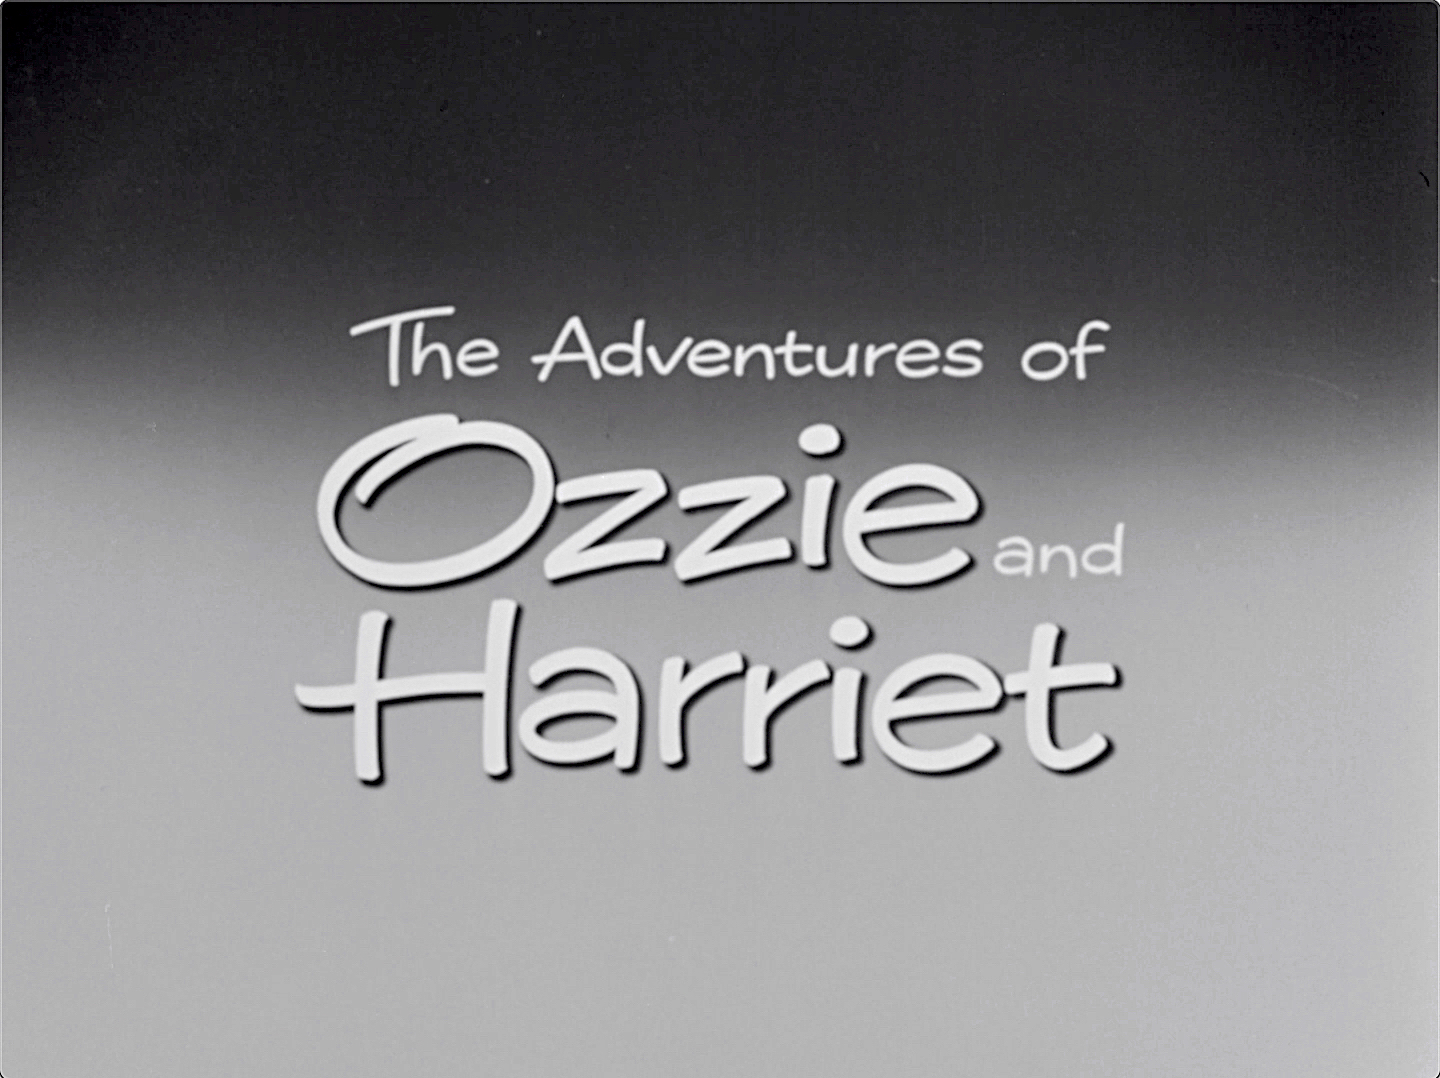 the-adventures-of-ozzie-and-harriet-s05e15-hairstyle-for-harriet-jan-09-1957-1-jpg.197131